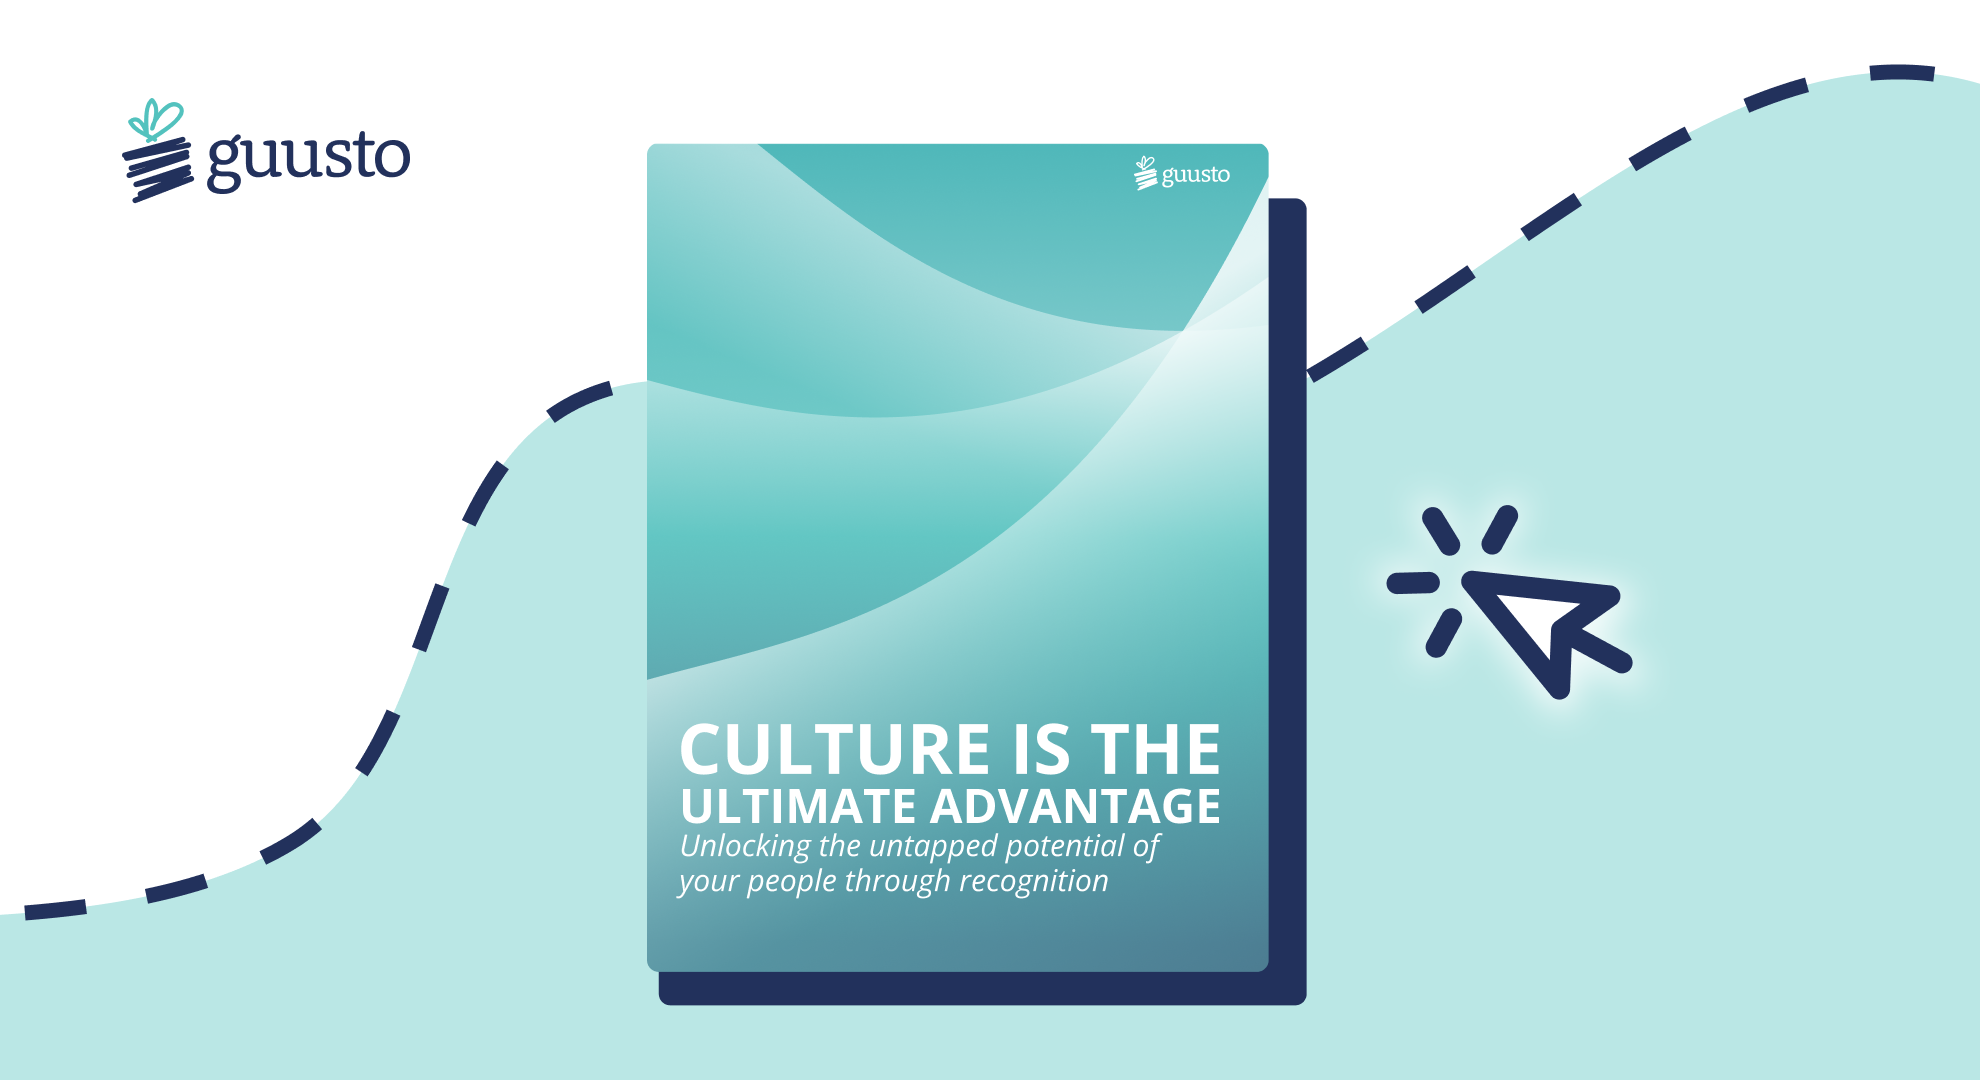 Why Culture is the Ultimate Advantage